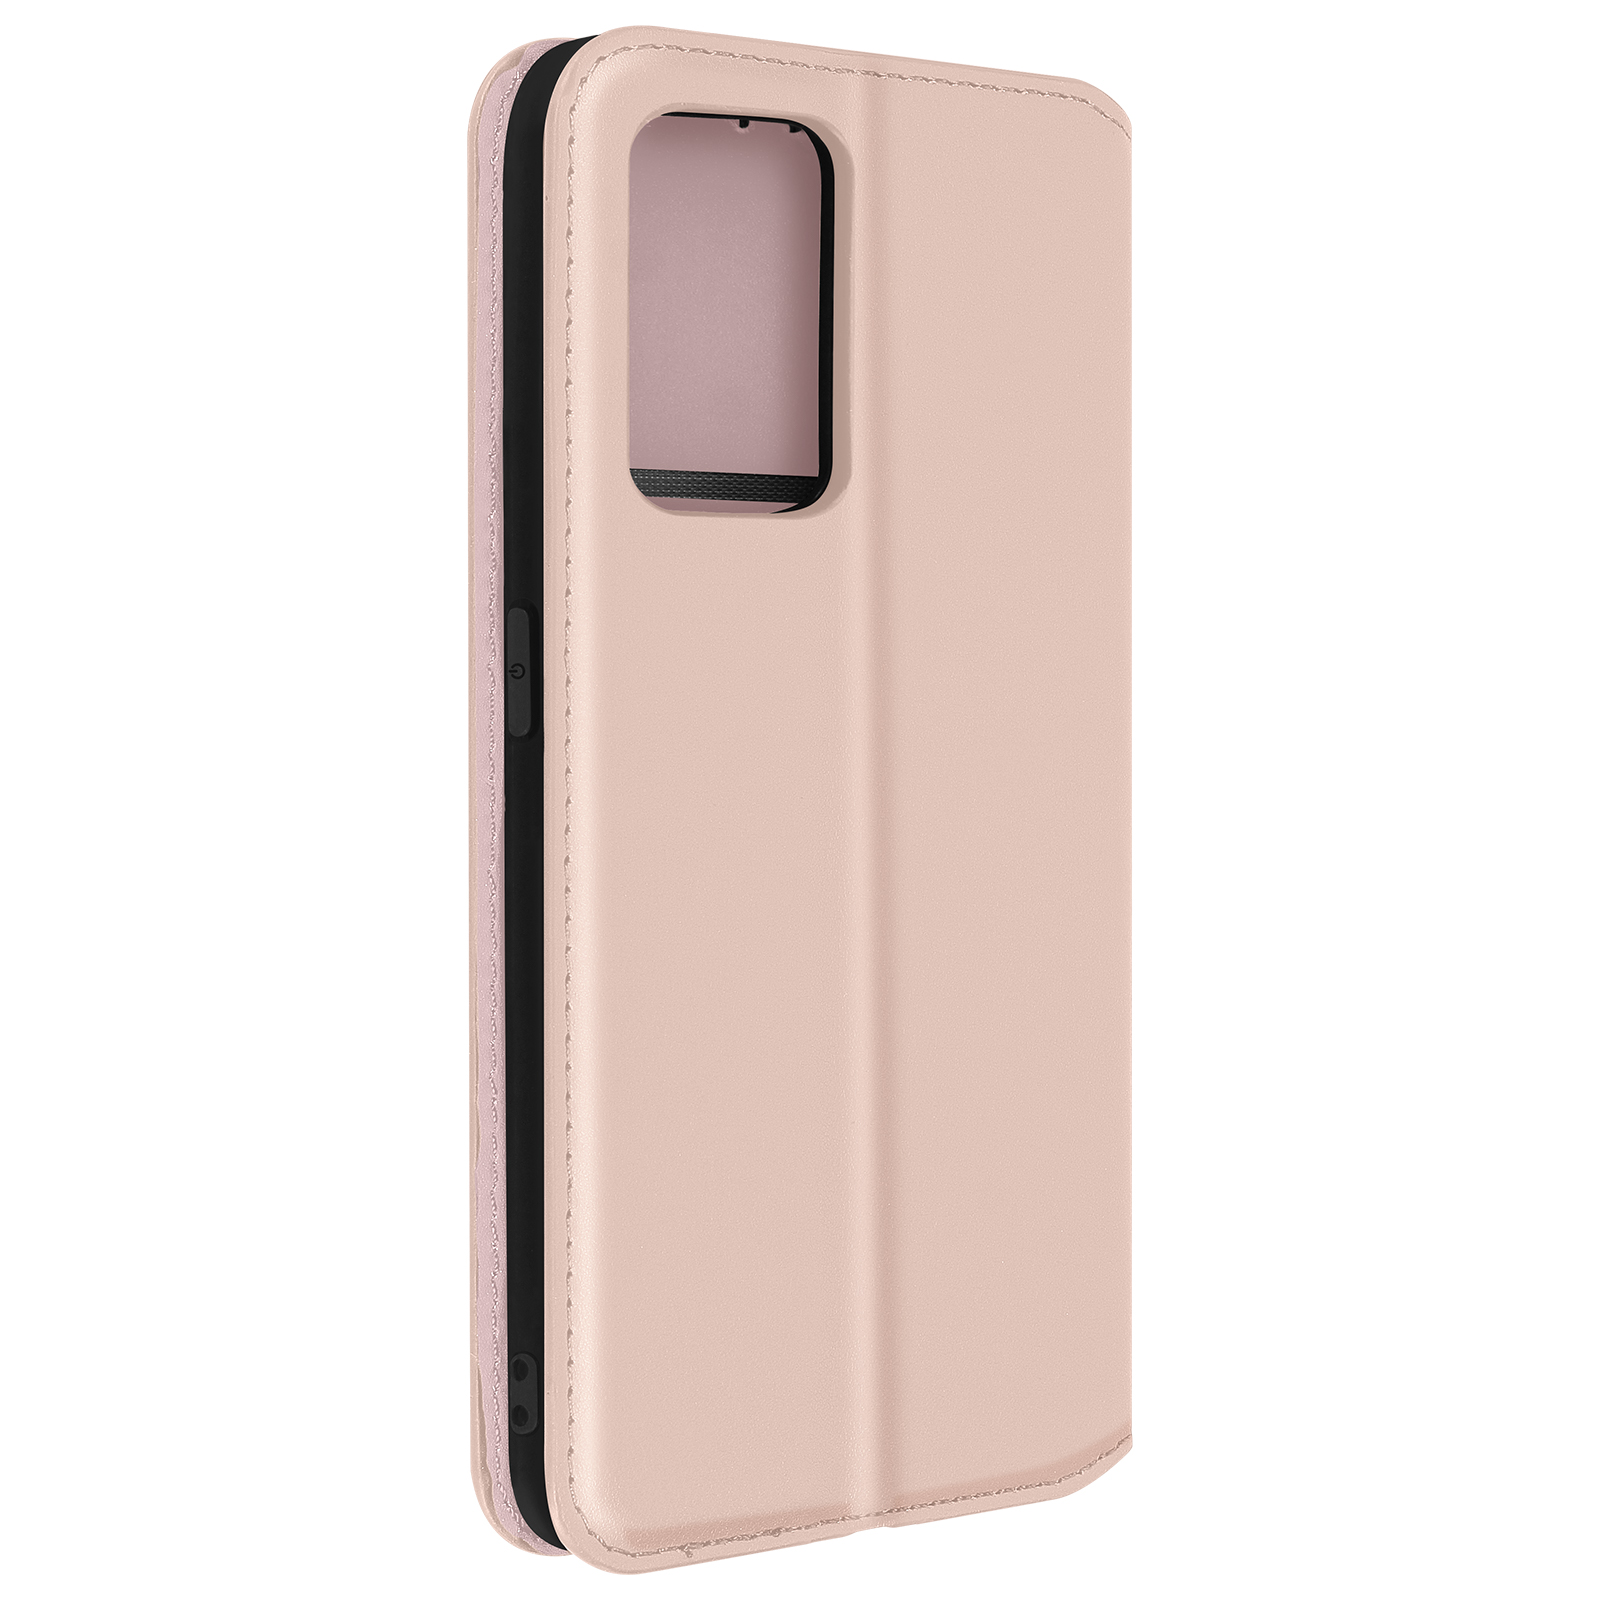 Backcover Find AVIZAR Magnetklappe mit Rosegold Series, lite, Bookcover, Oppo, X5 Classic Edition,